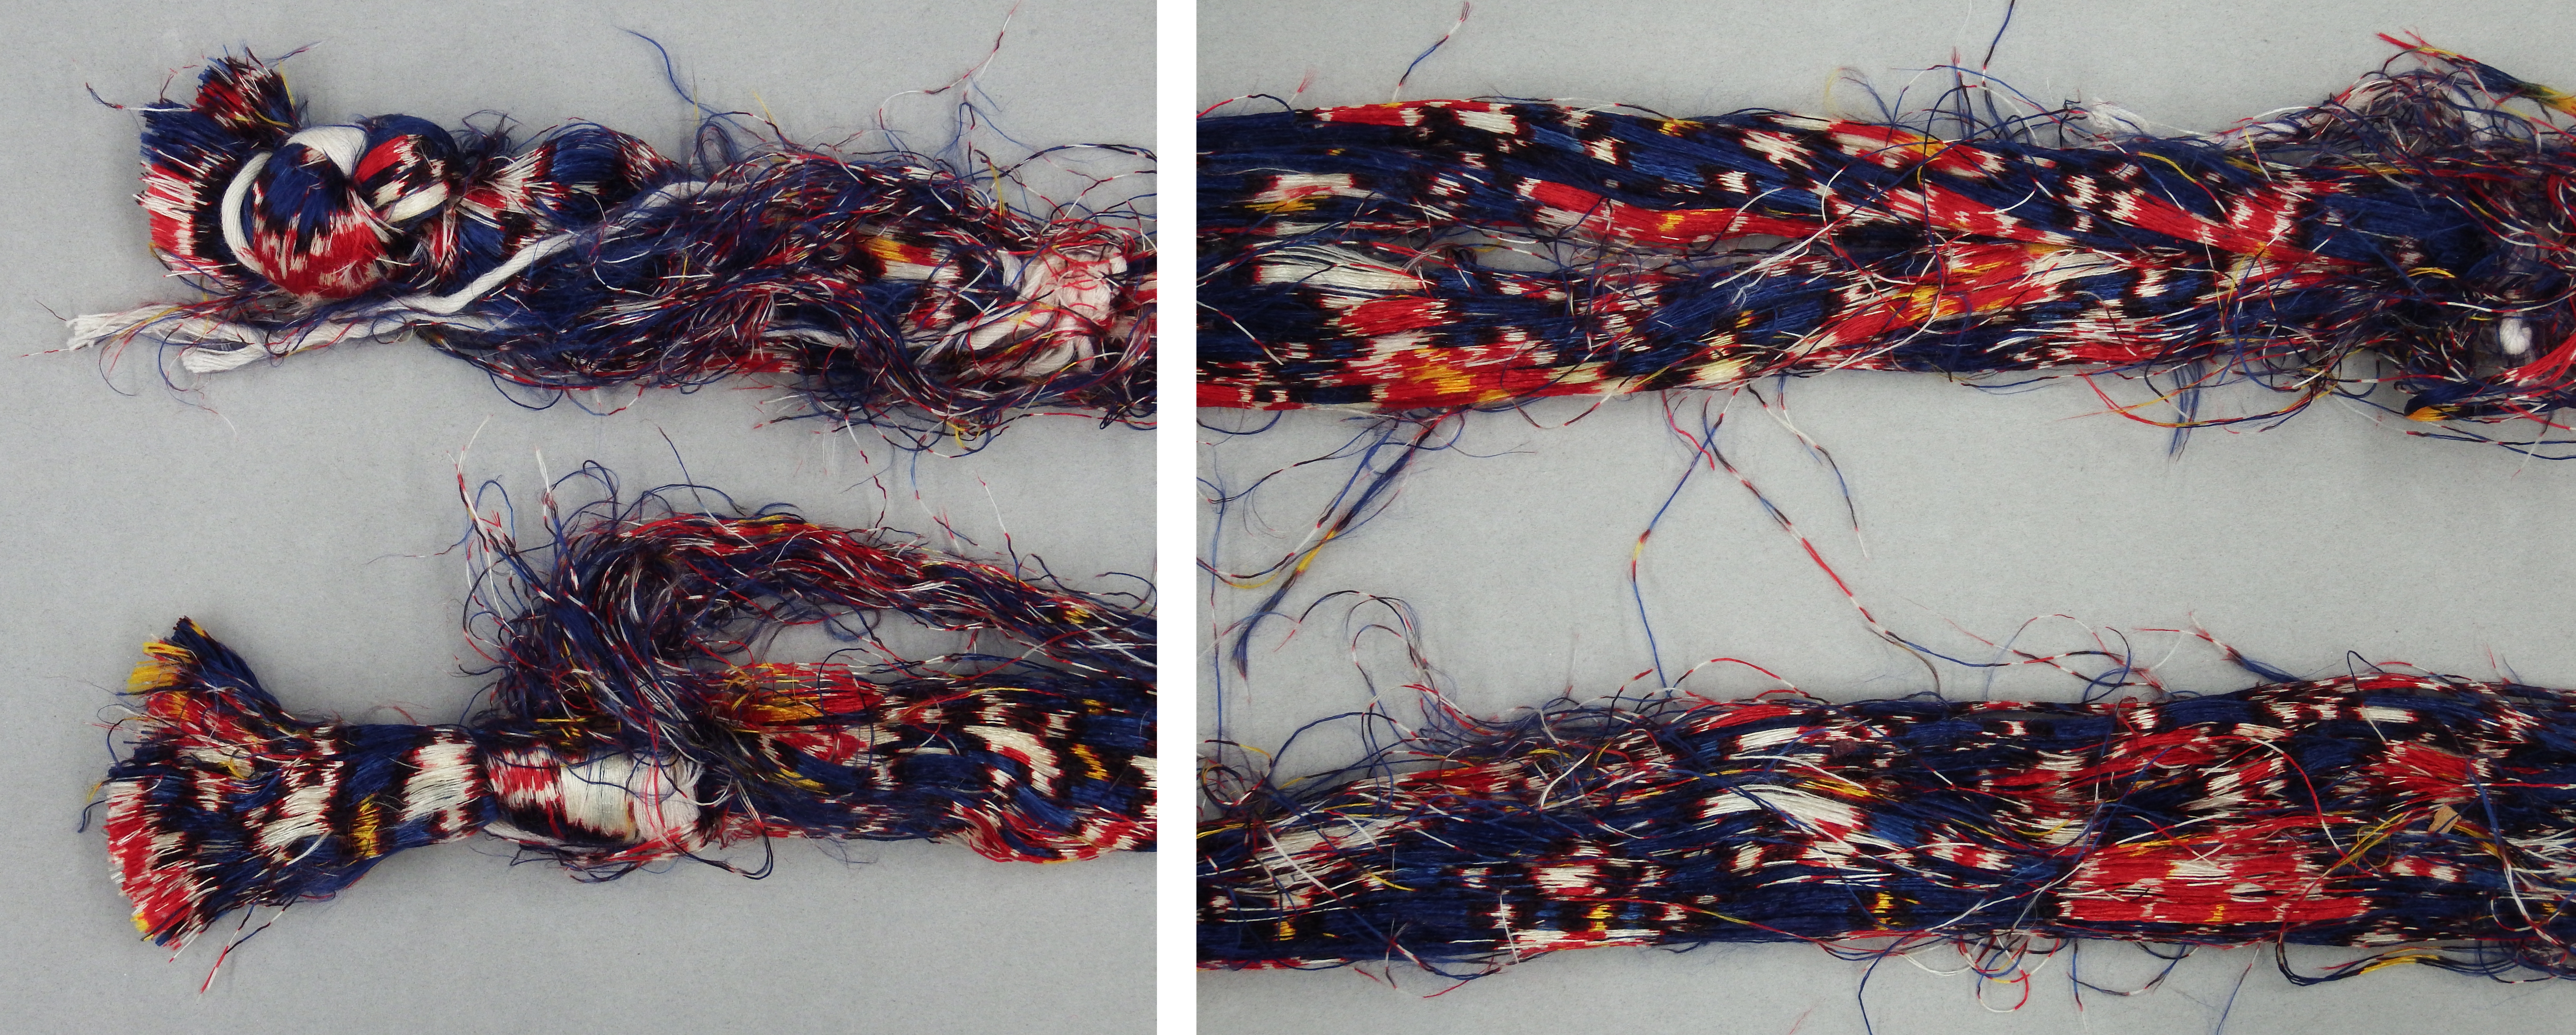 Details of the tangled warp ikat threads.